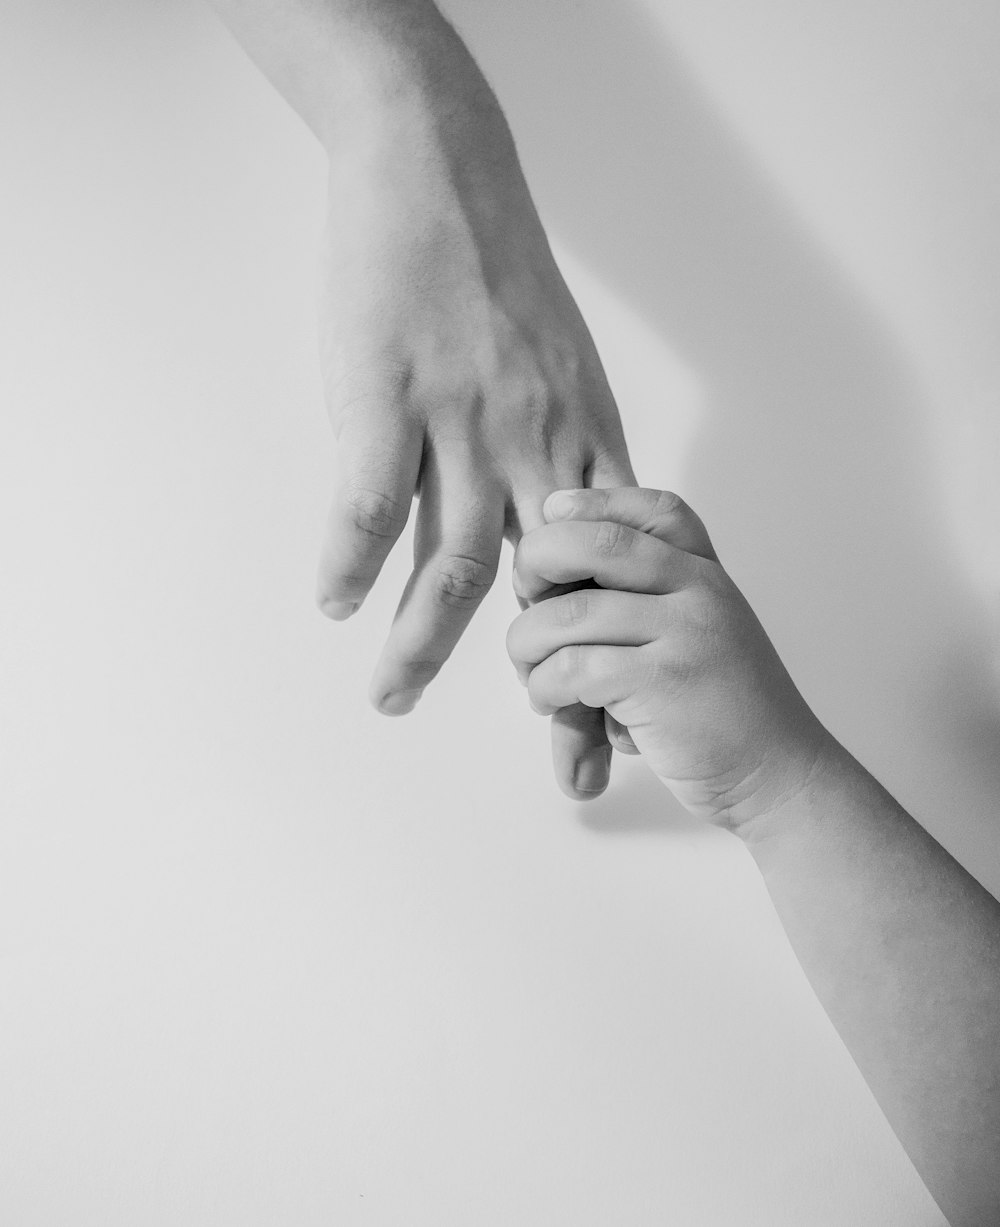 grayscale photo of to hands